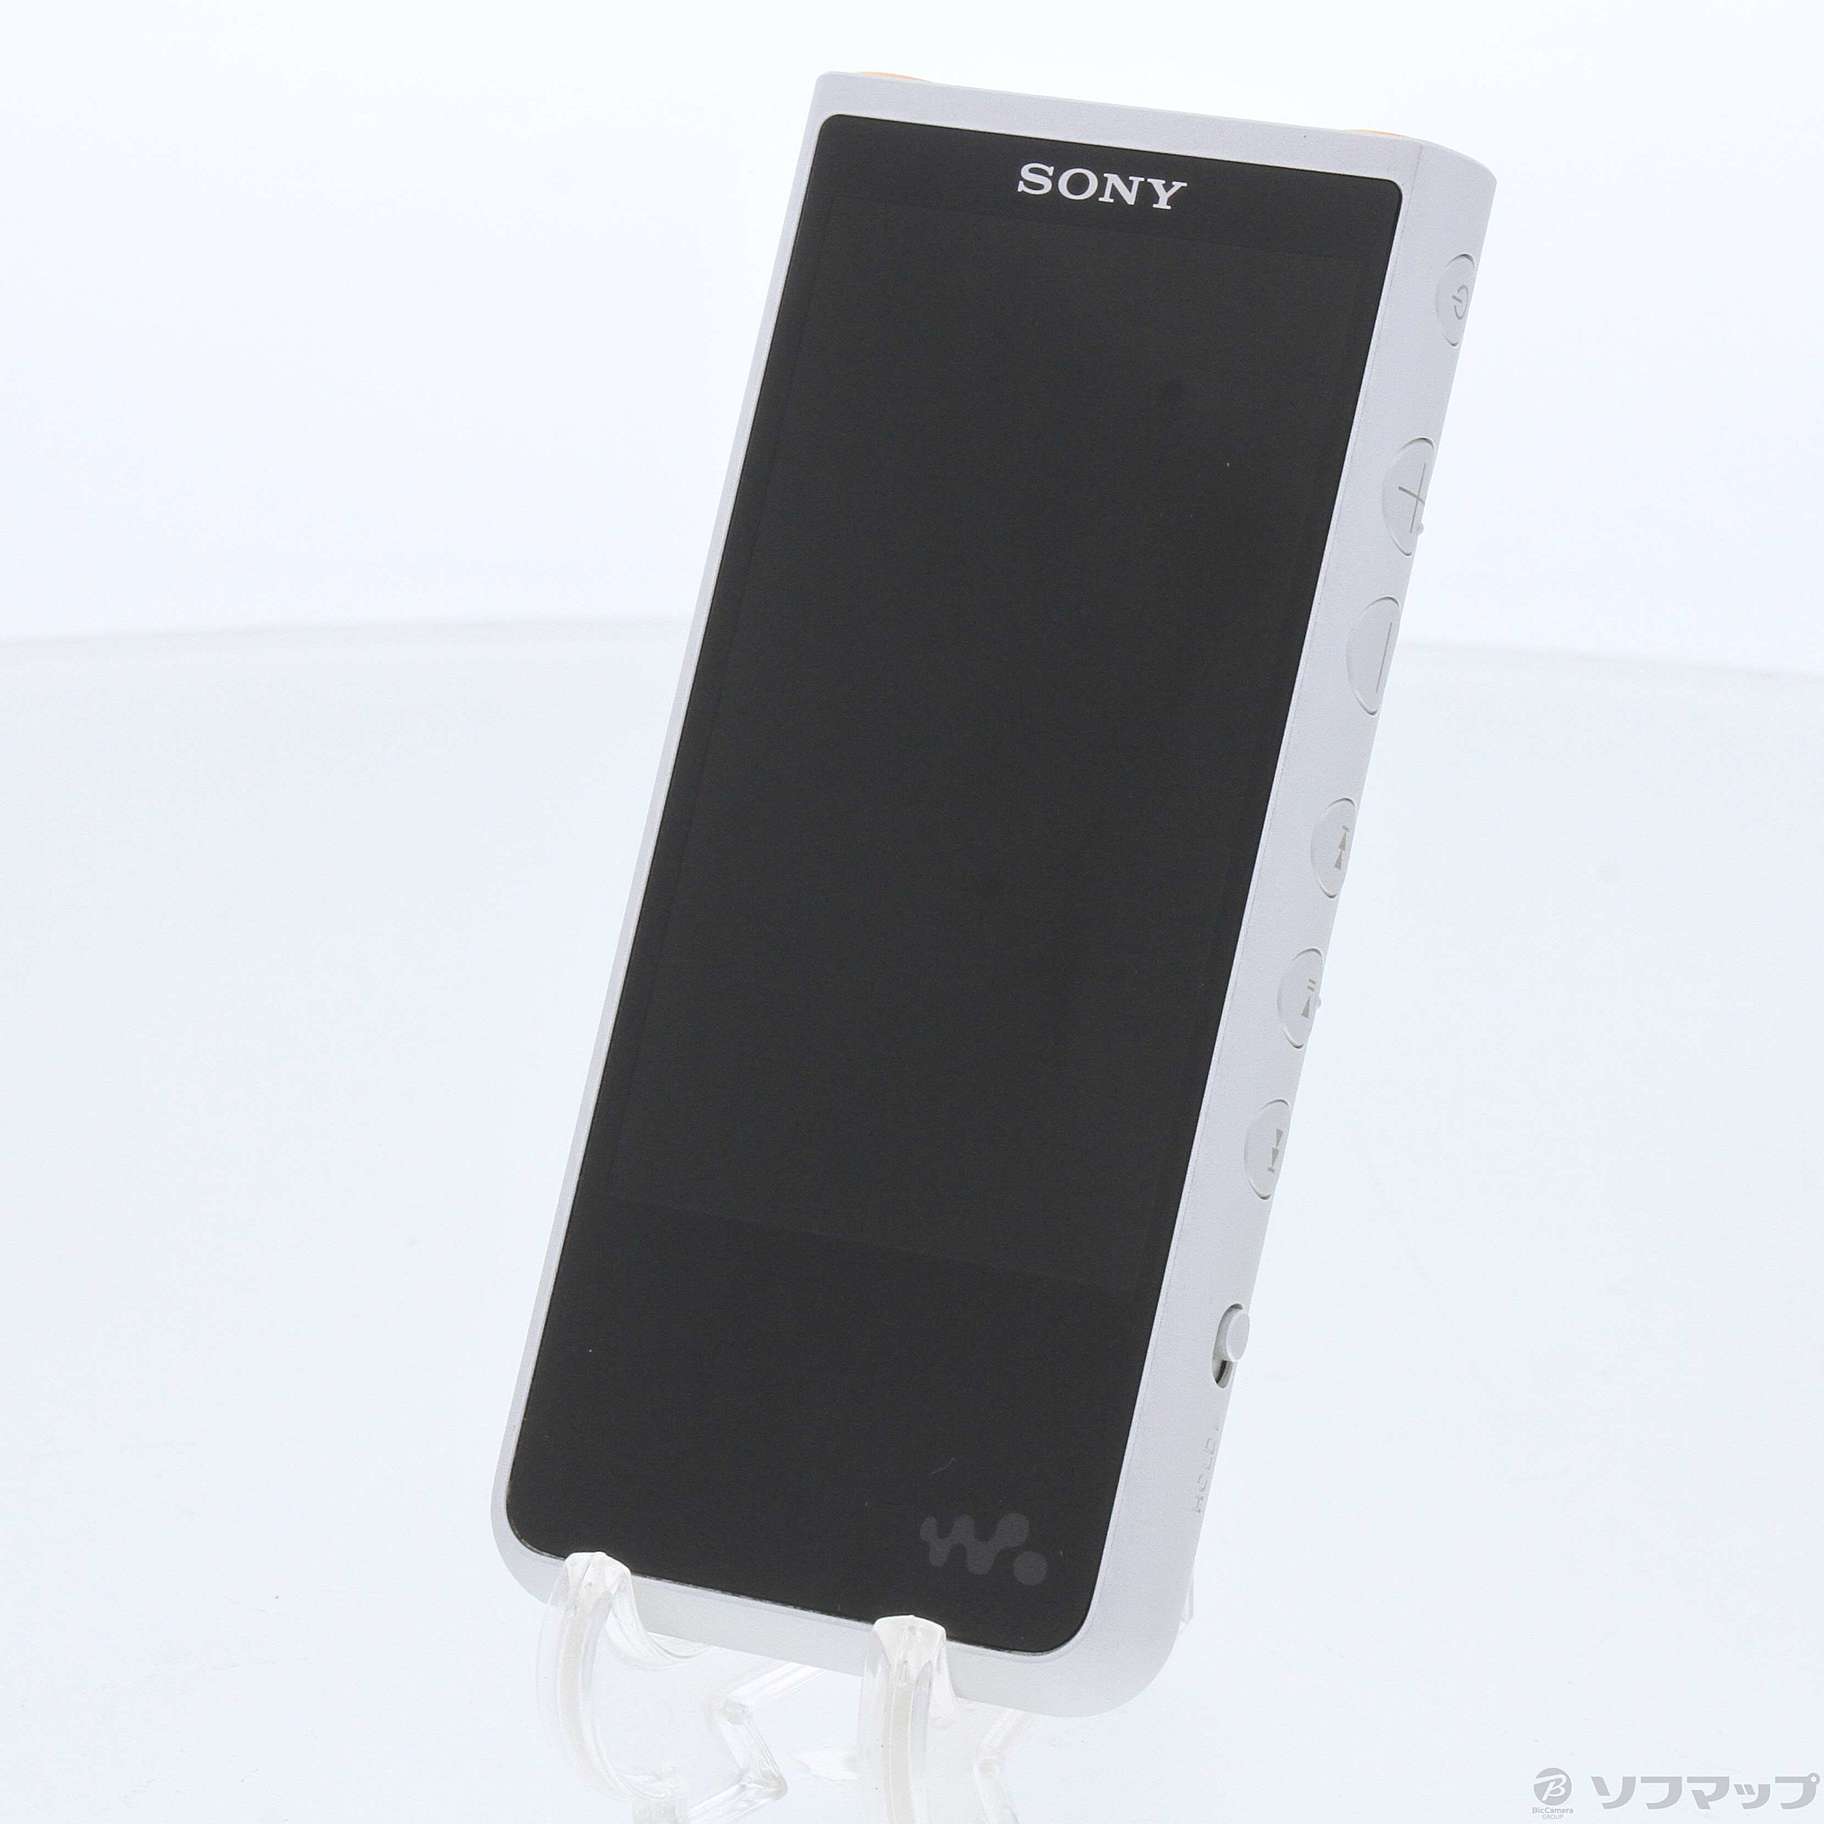 SONY ウォークマンZX500 NW-ZX507 S シルバー 64GB